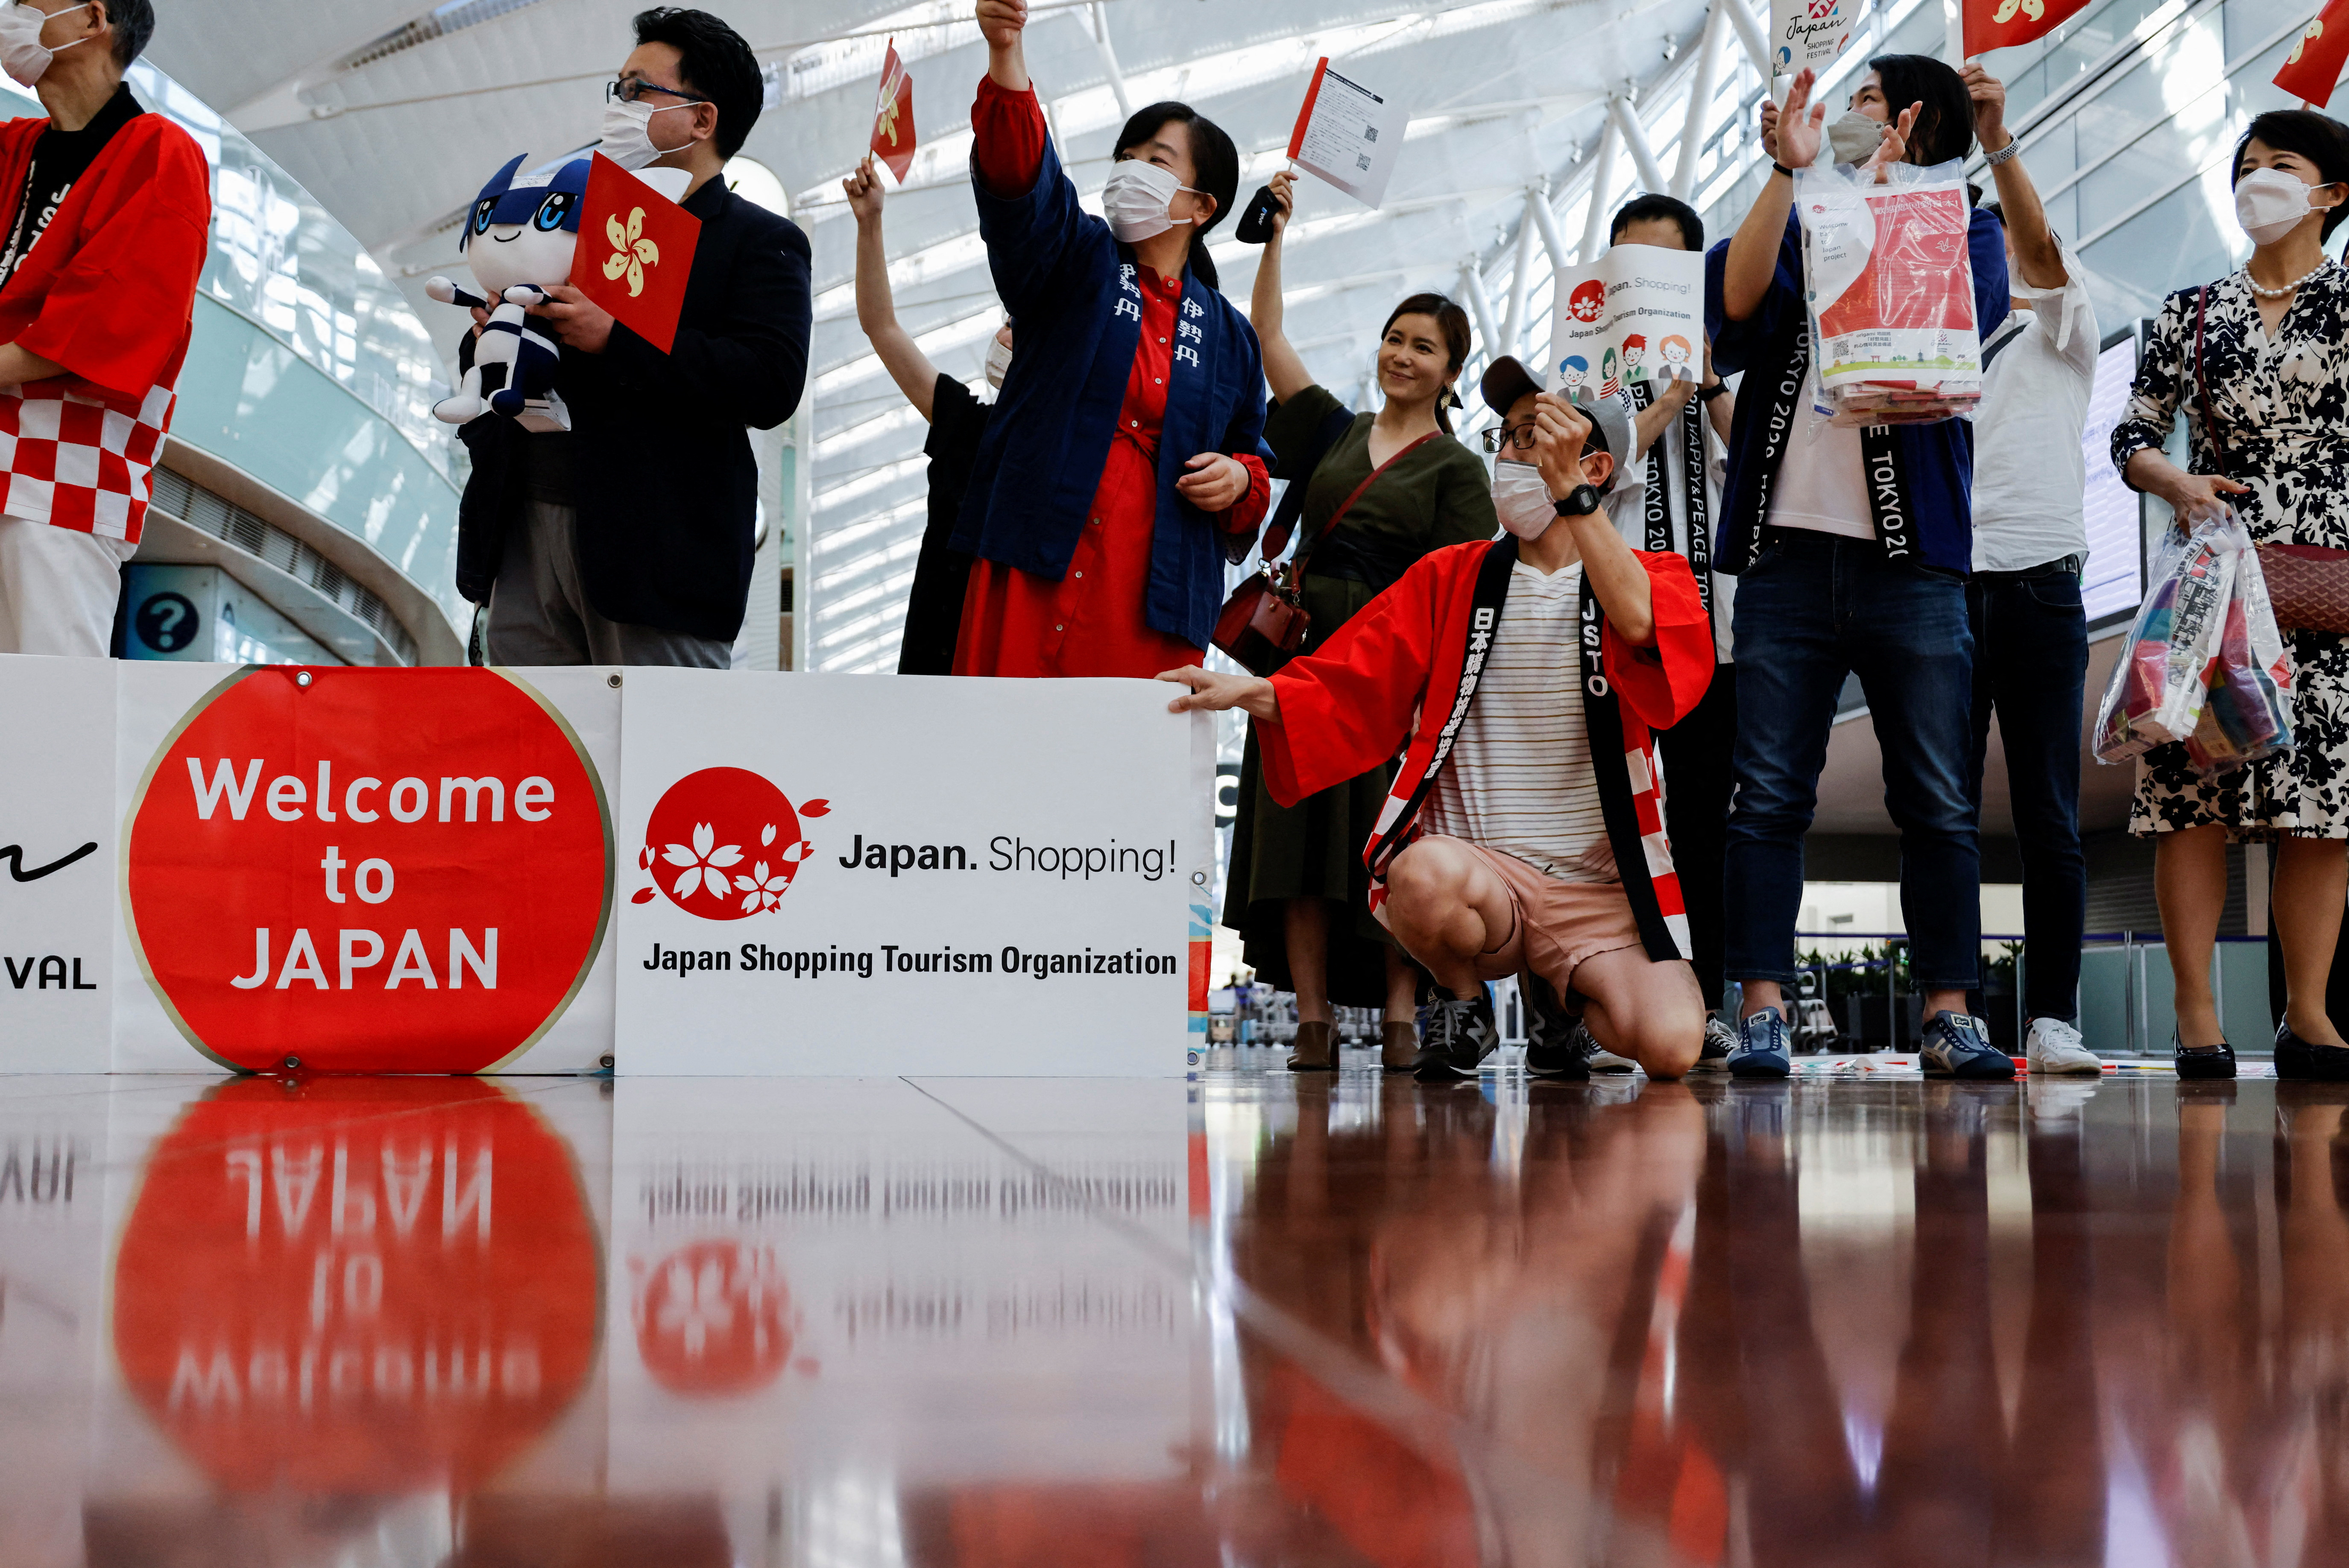 Members from Japan's shopping and tourism companies greet a group of tourists from Hong Kong during an welcome event at Haneda airport in Tokyo